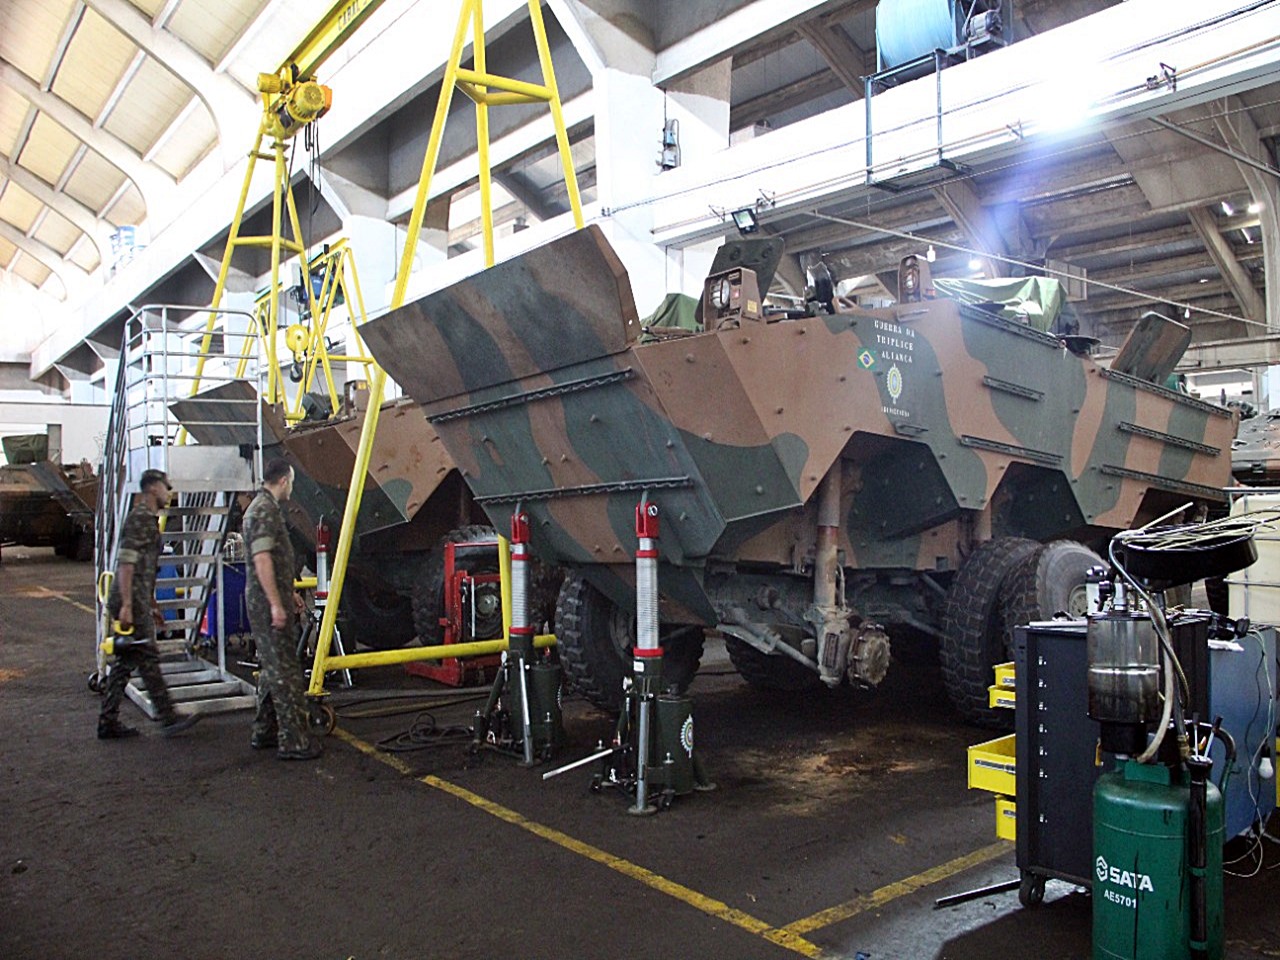 Material Management provides training on standardization of chassis maintenance and fleet management in VBTP-MSR 6x6 Guarani